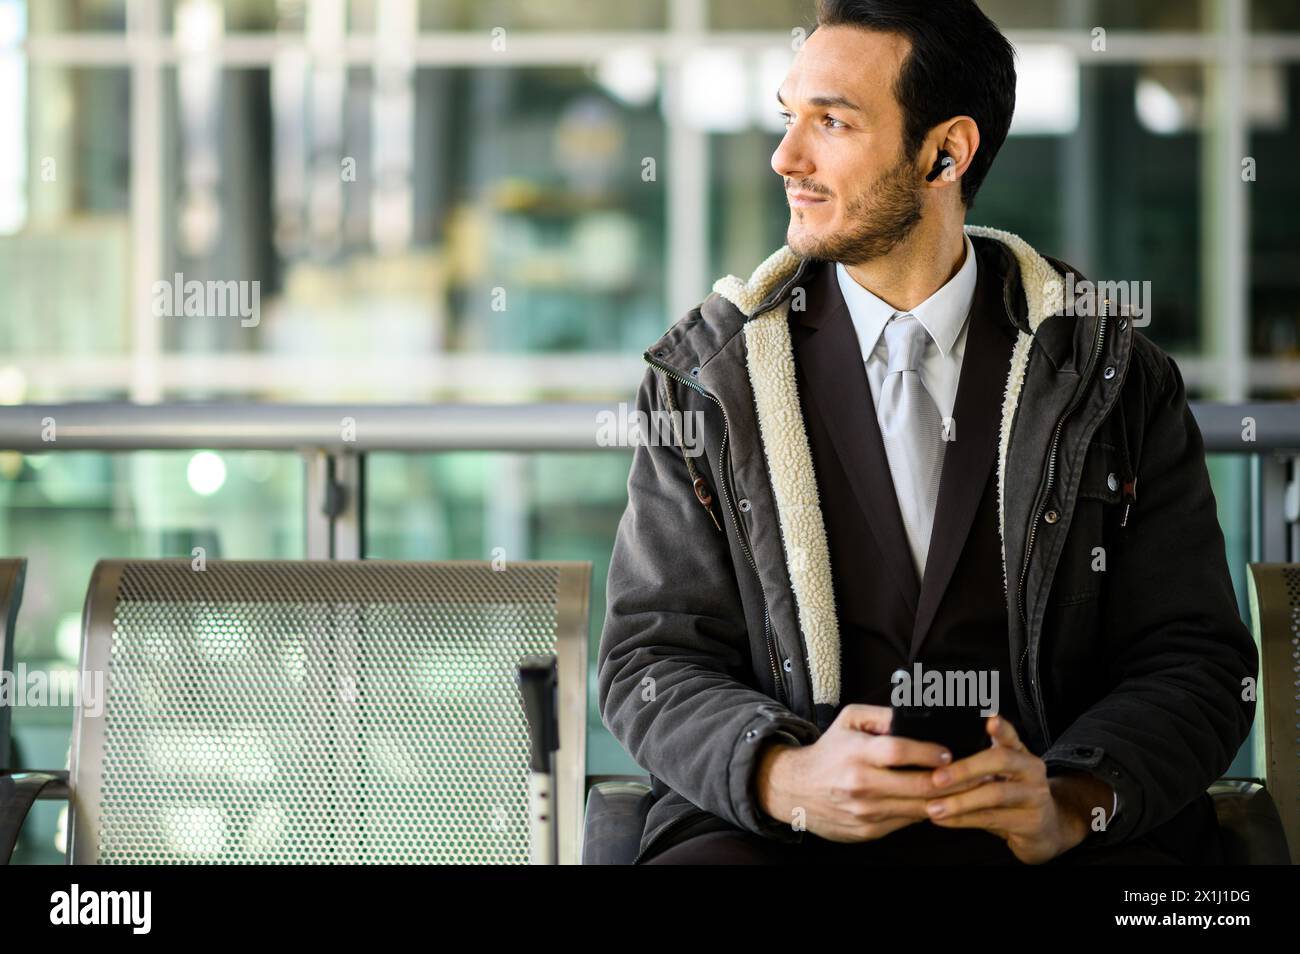 Young adult male in professional attire using a phone while sitting at a public transport station Stock Photo